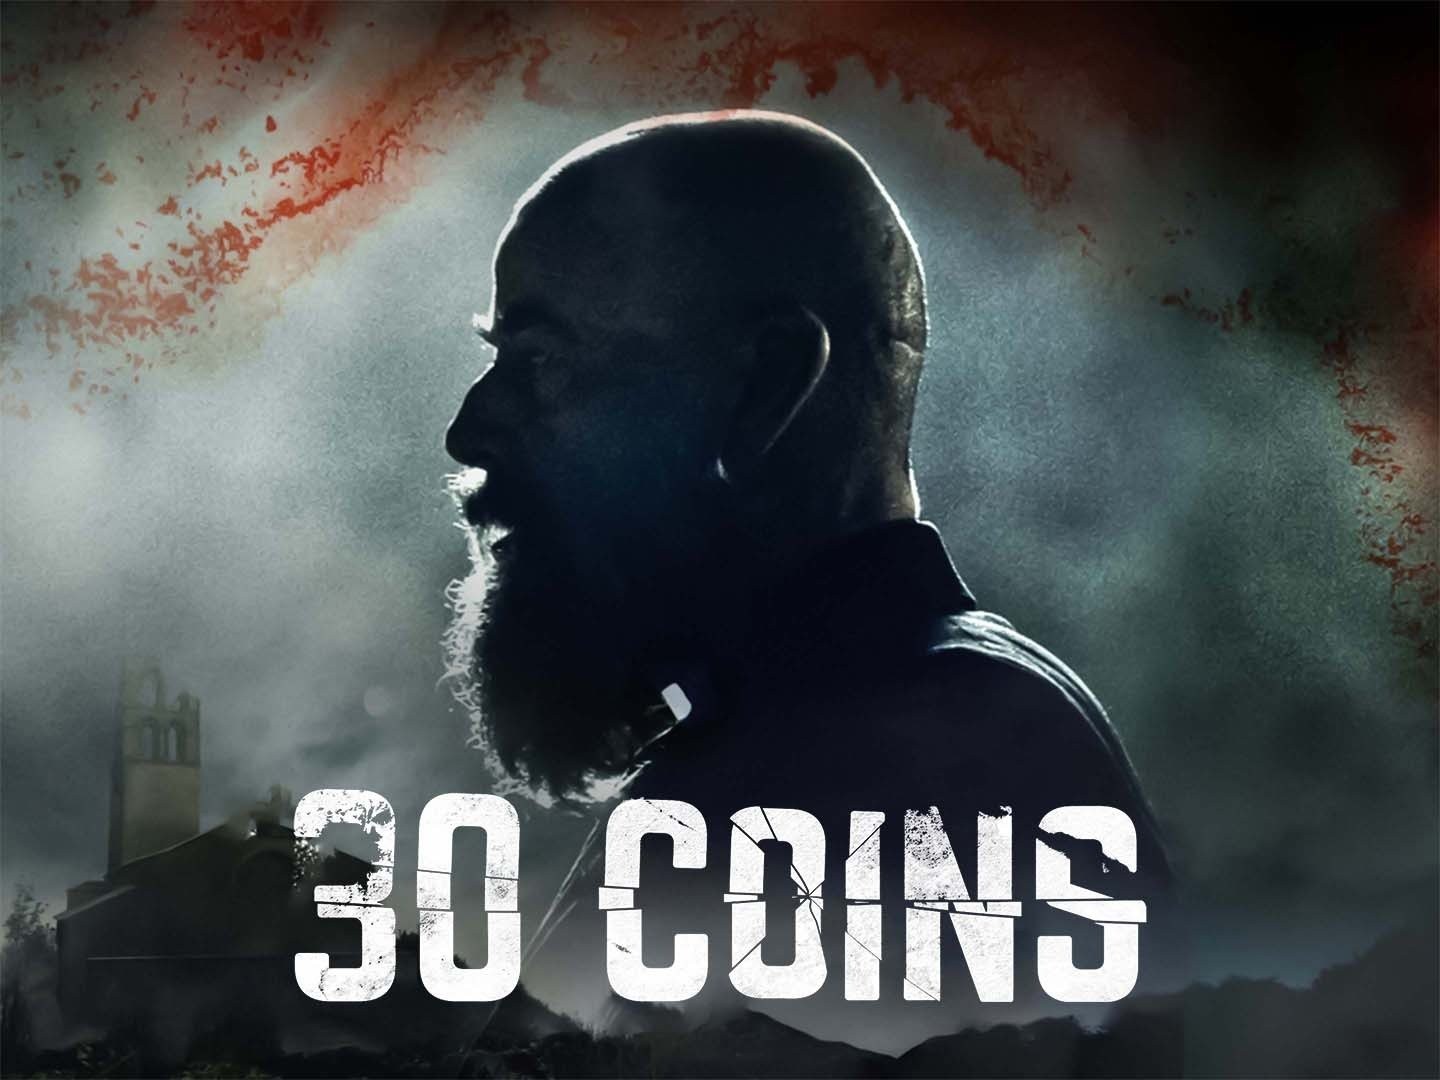 30 coins (HBO Max): trailer, cast, season 2 and much more